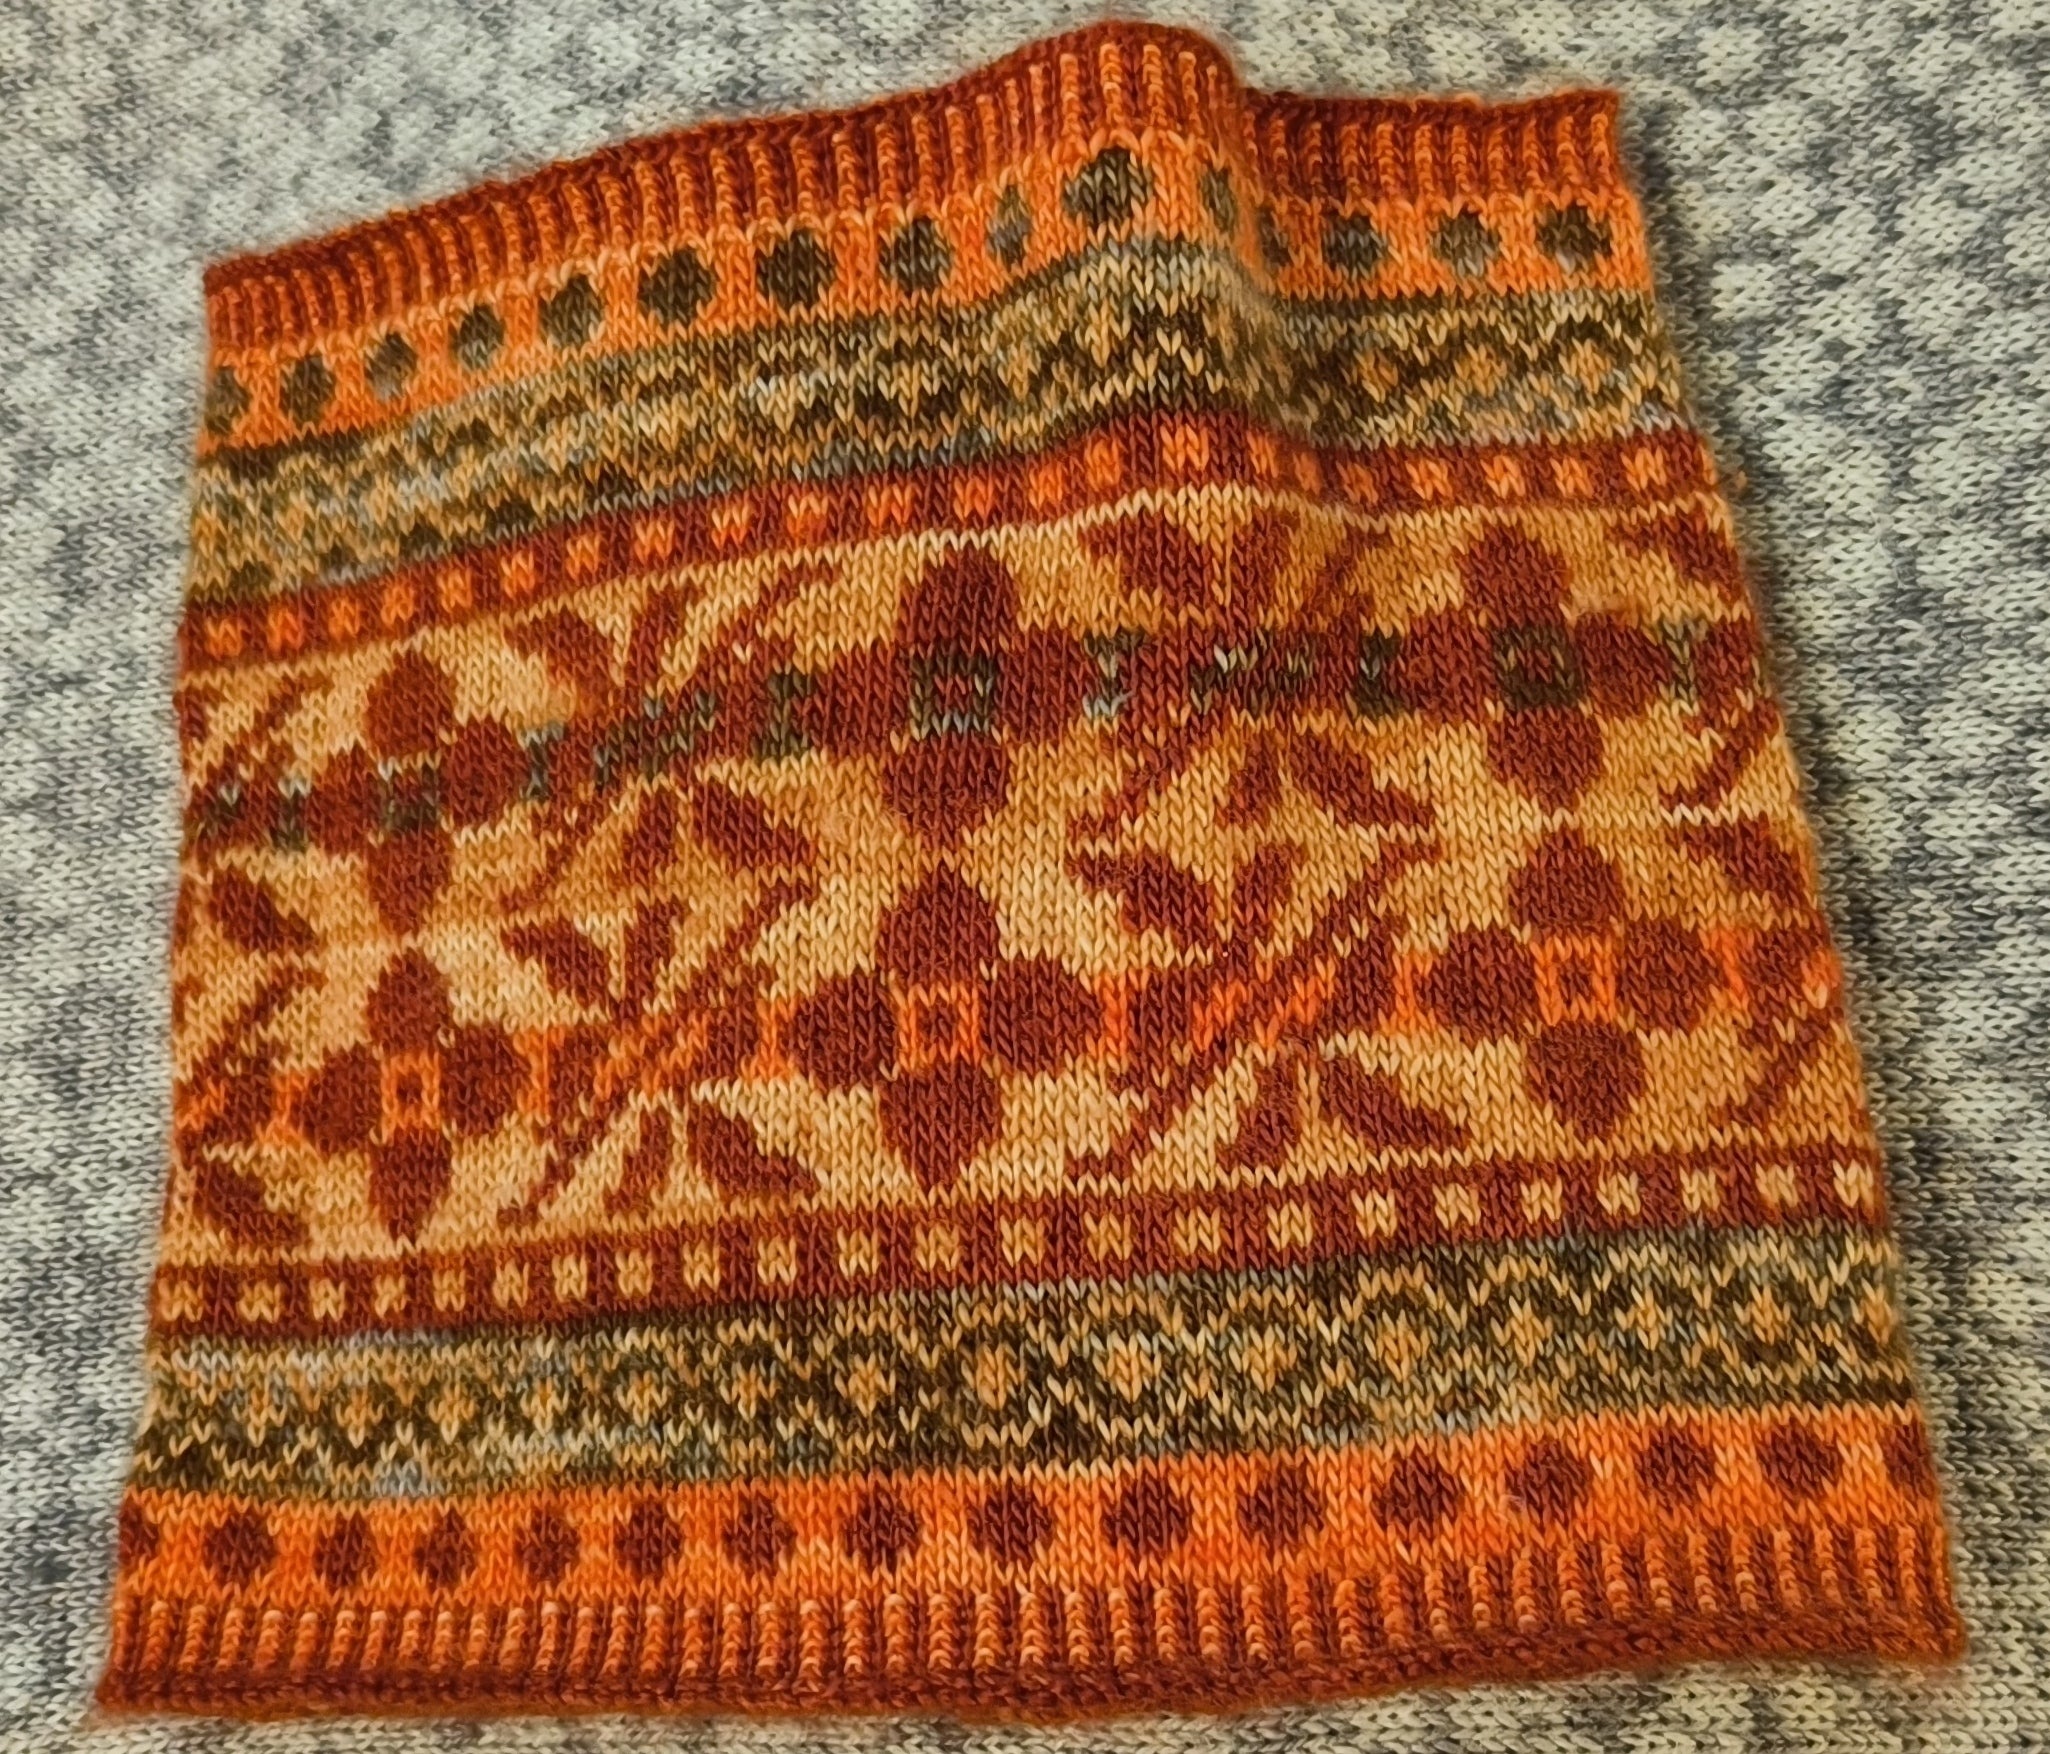 A detailed colourwork cowl in shades of orange, red and brown